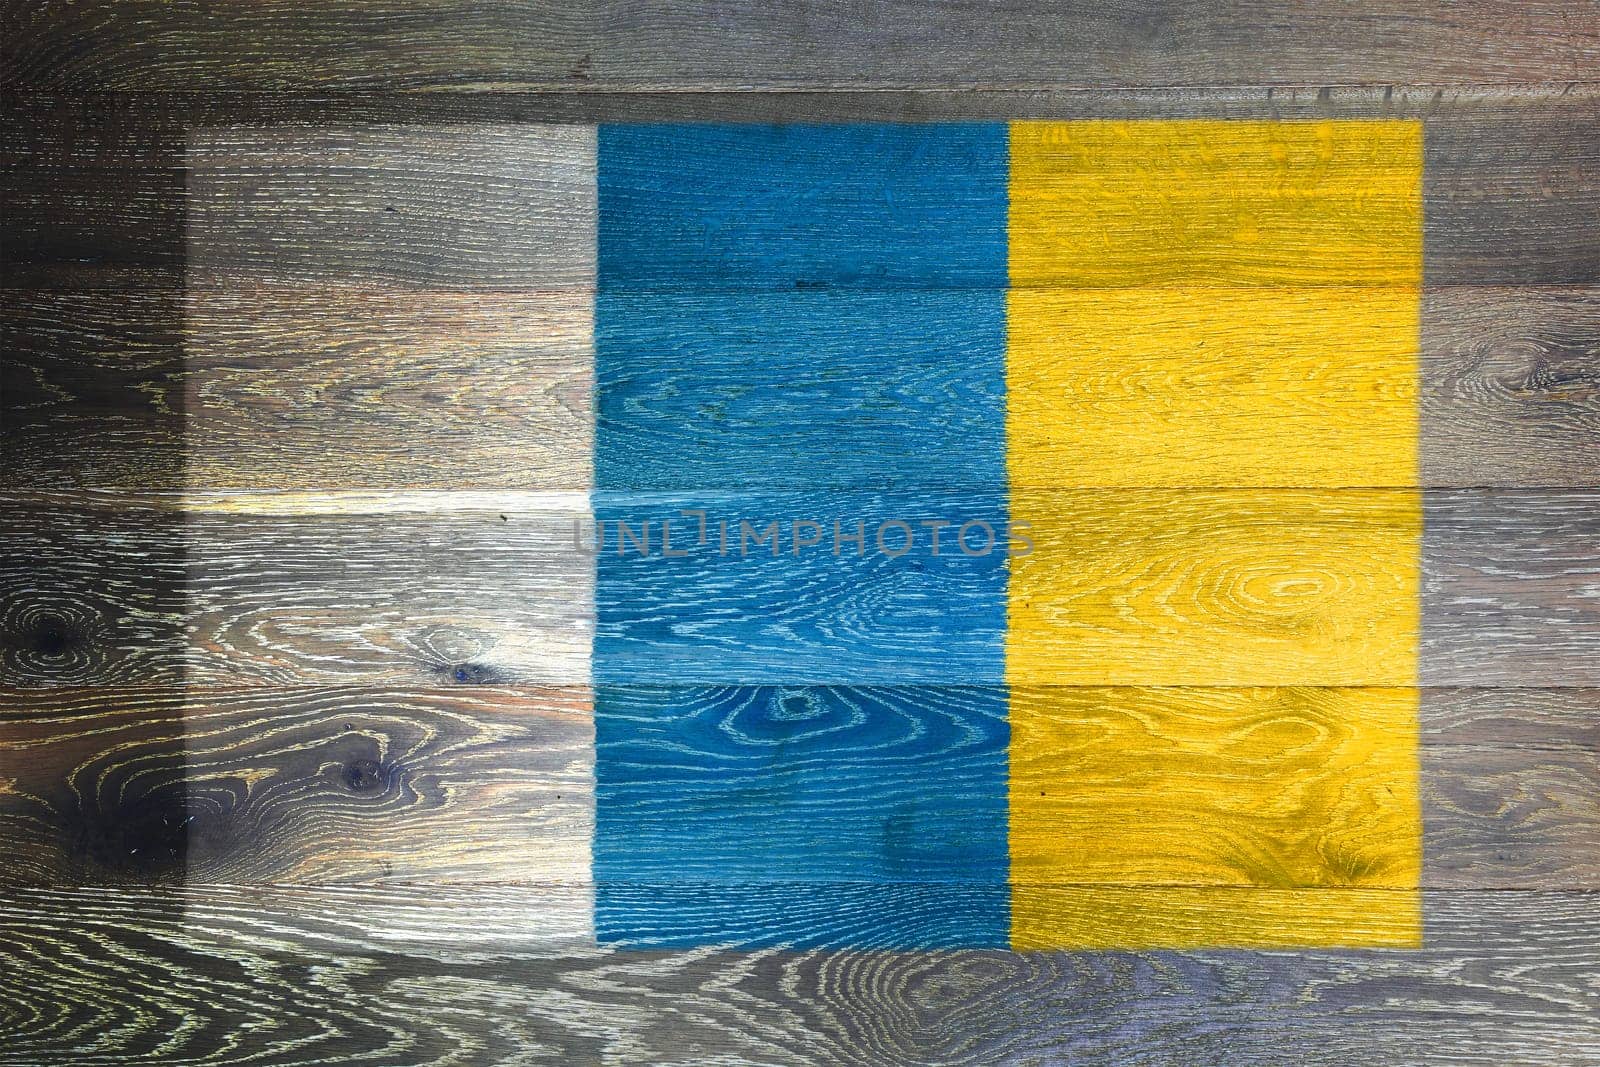 A Canary Islands flag on rustic old wood surface background